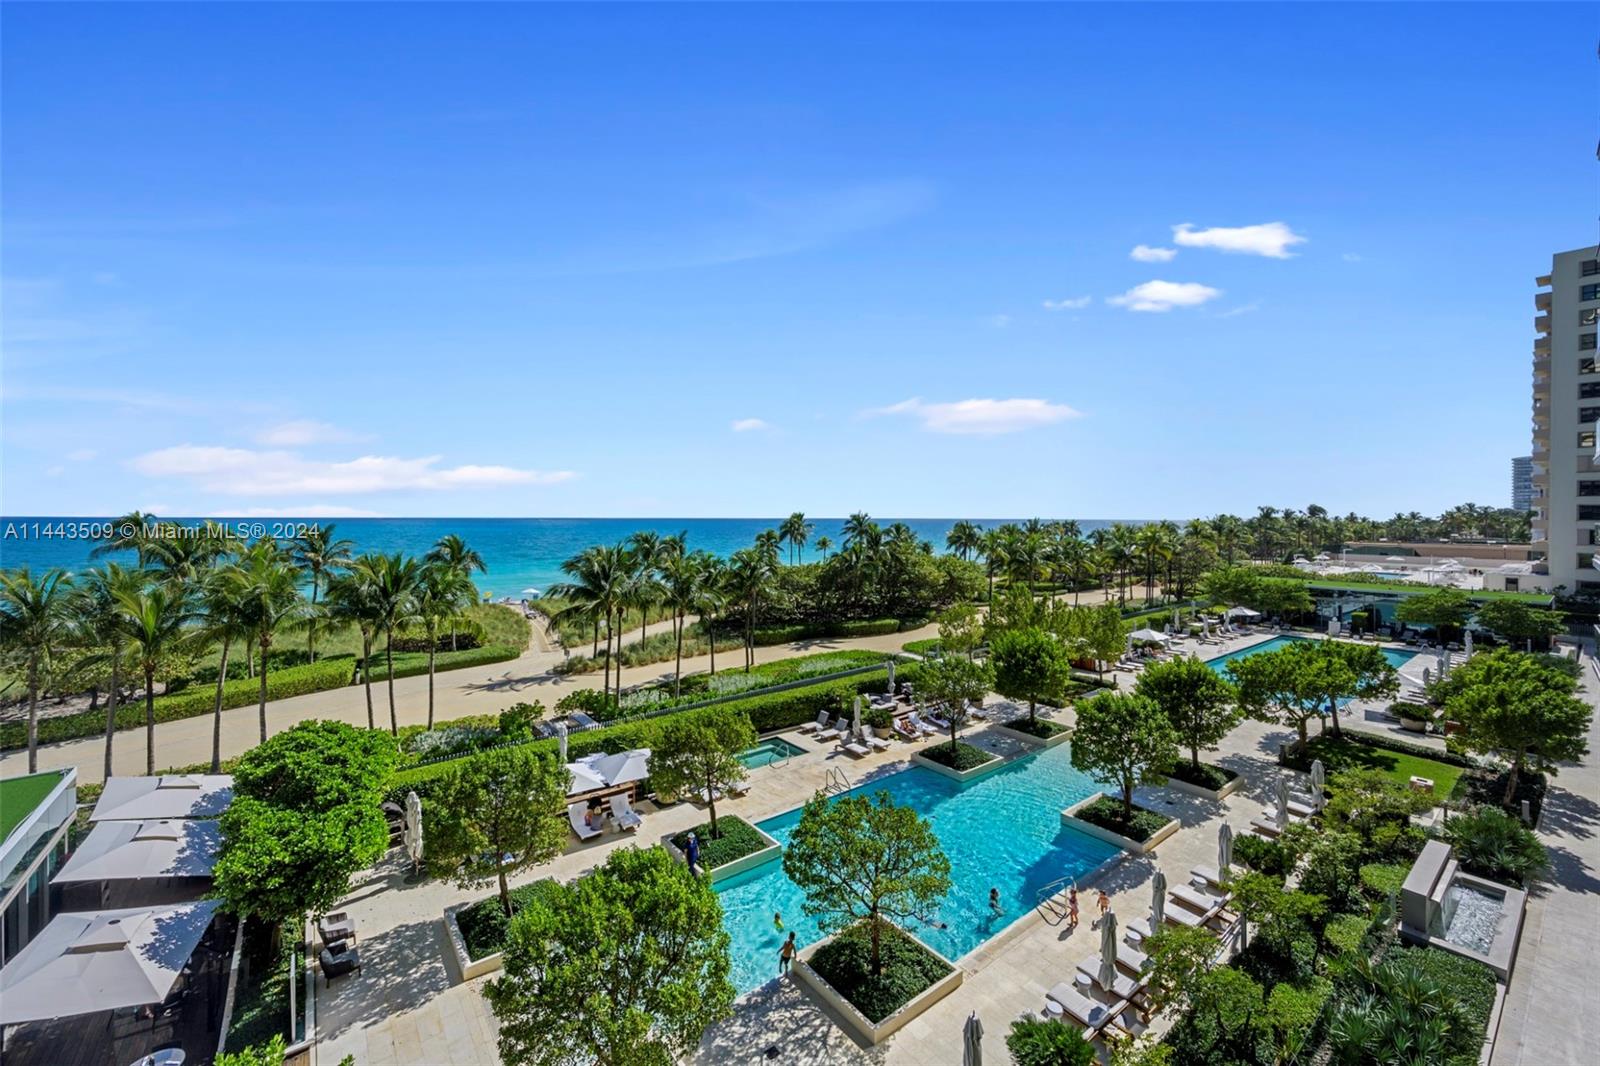 Exquisite turnkey corner residence in the prestigious Oceana Bal Harbour. This exceptional 2-bedroom, 2.5-bathroom, 2,232 SF home boasts breathtaking direct ocean views, an expansive 800 SF wrap-around balcony, and 10-foot floor-to-ceiling glass with extra-wide windows. The private elevator opens directly into your foyer. The resort-style amenities allow you to indulge in a luxurious 5-star experience without ever needing to leave home. Enjoy the convenience of 24-hour concierge and valet service, a state-of-the-art gym, a beachfront restaurant, oversized pools, two tennis courts, a movie theater, a world-class spa, private cabanas, museum-quality artwork throughout, and much more. Easy to show.